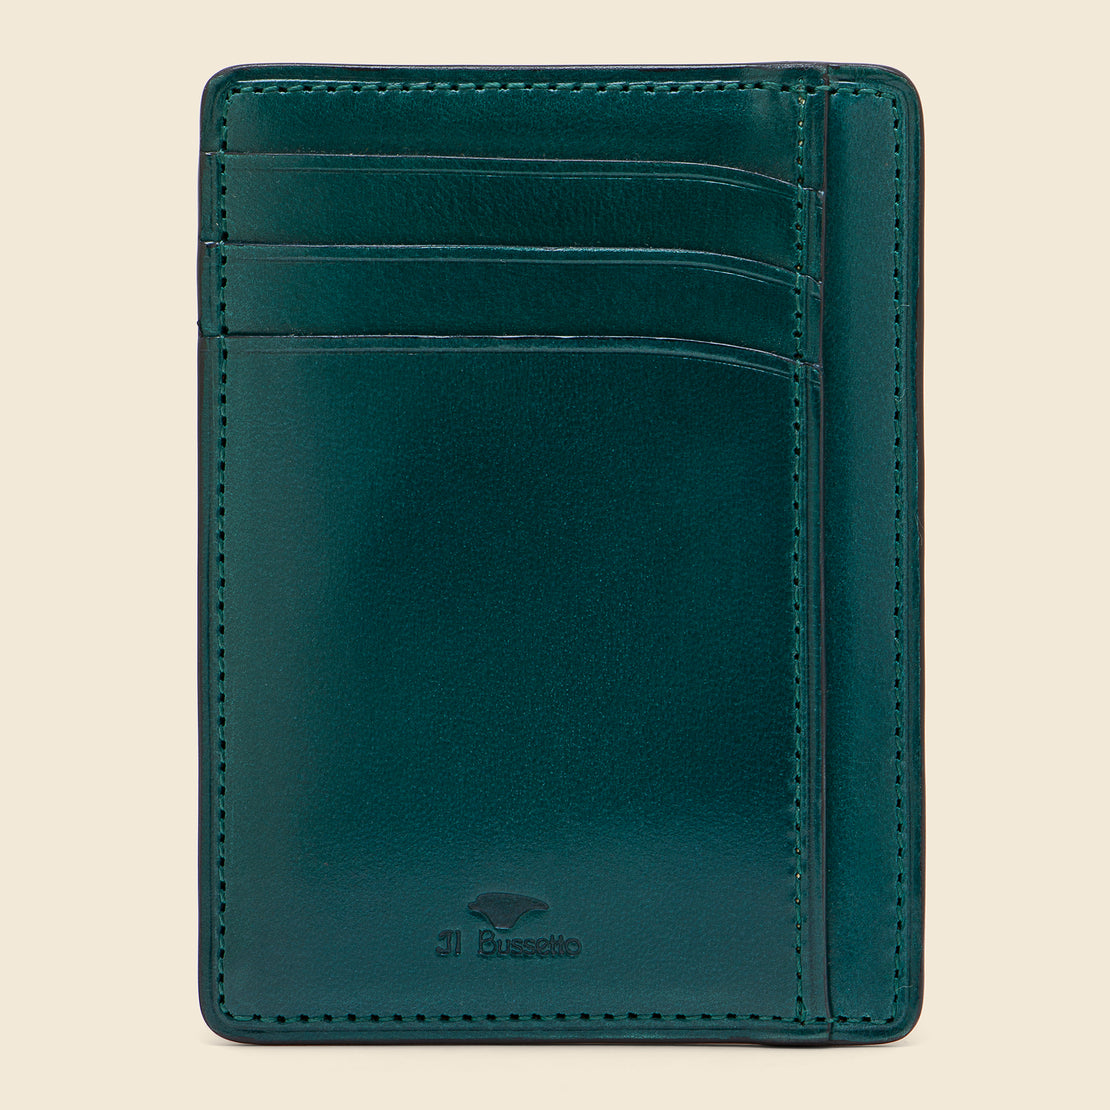 Il Bussetto Card and Document Case - Evergreen